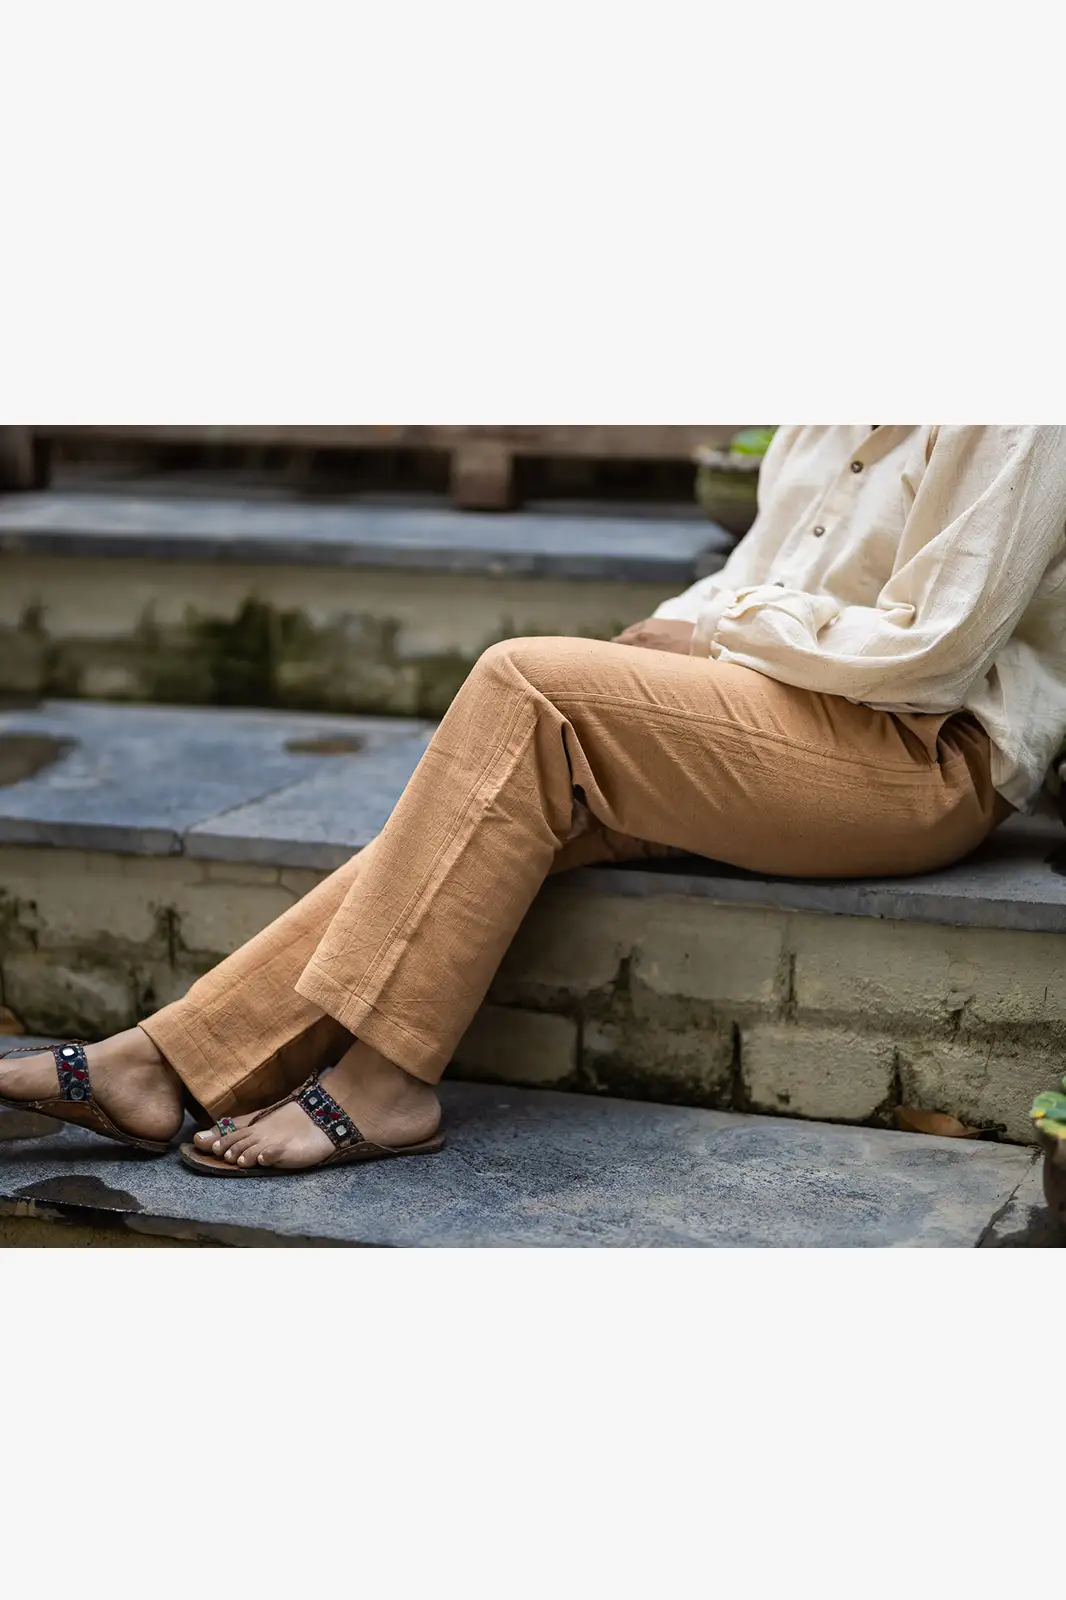 caramel trousers, trousers for womens, women loose trousers, formal women trousers, brown trousers, trousers pants for women, cotton trousers for women, womens cotton trousers, bottom trousers ladies, brown trousers pants